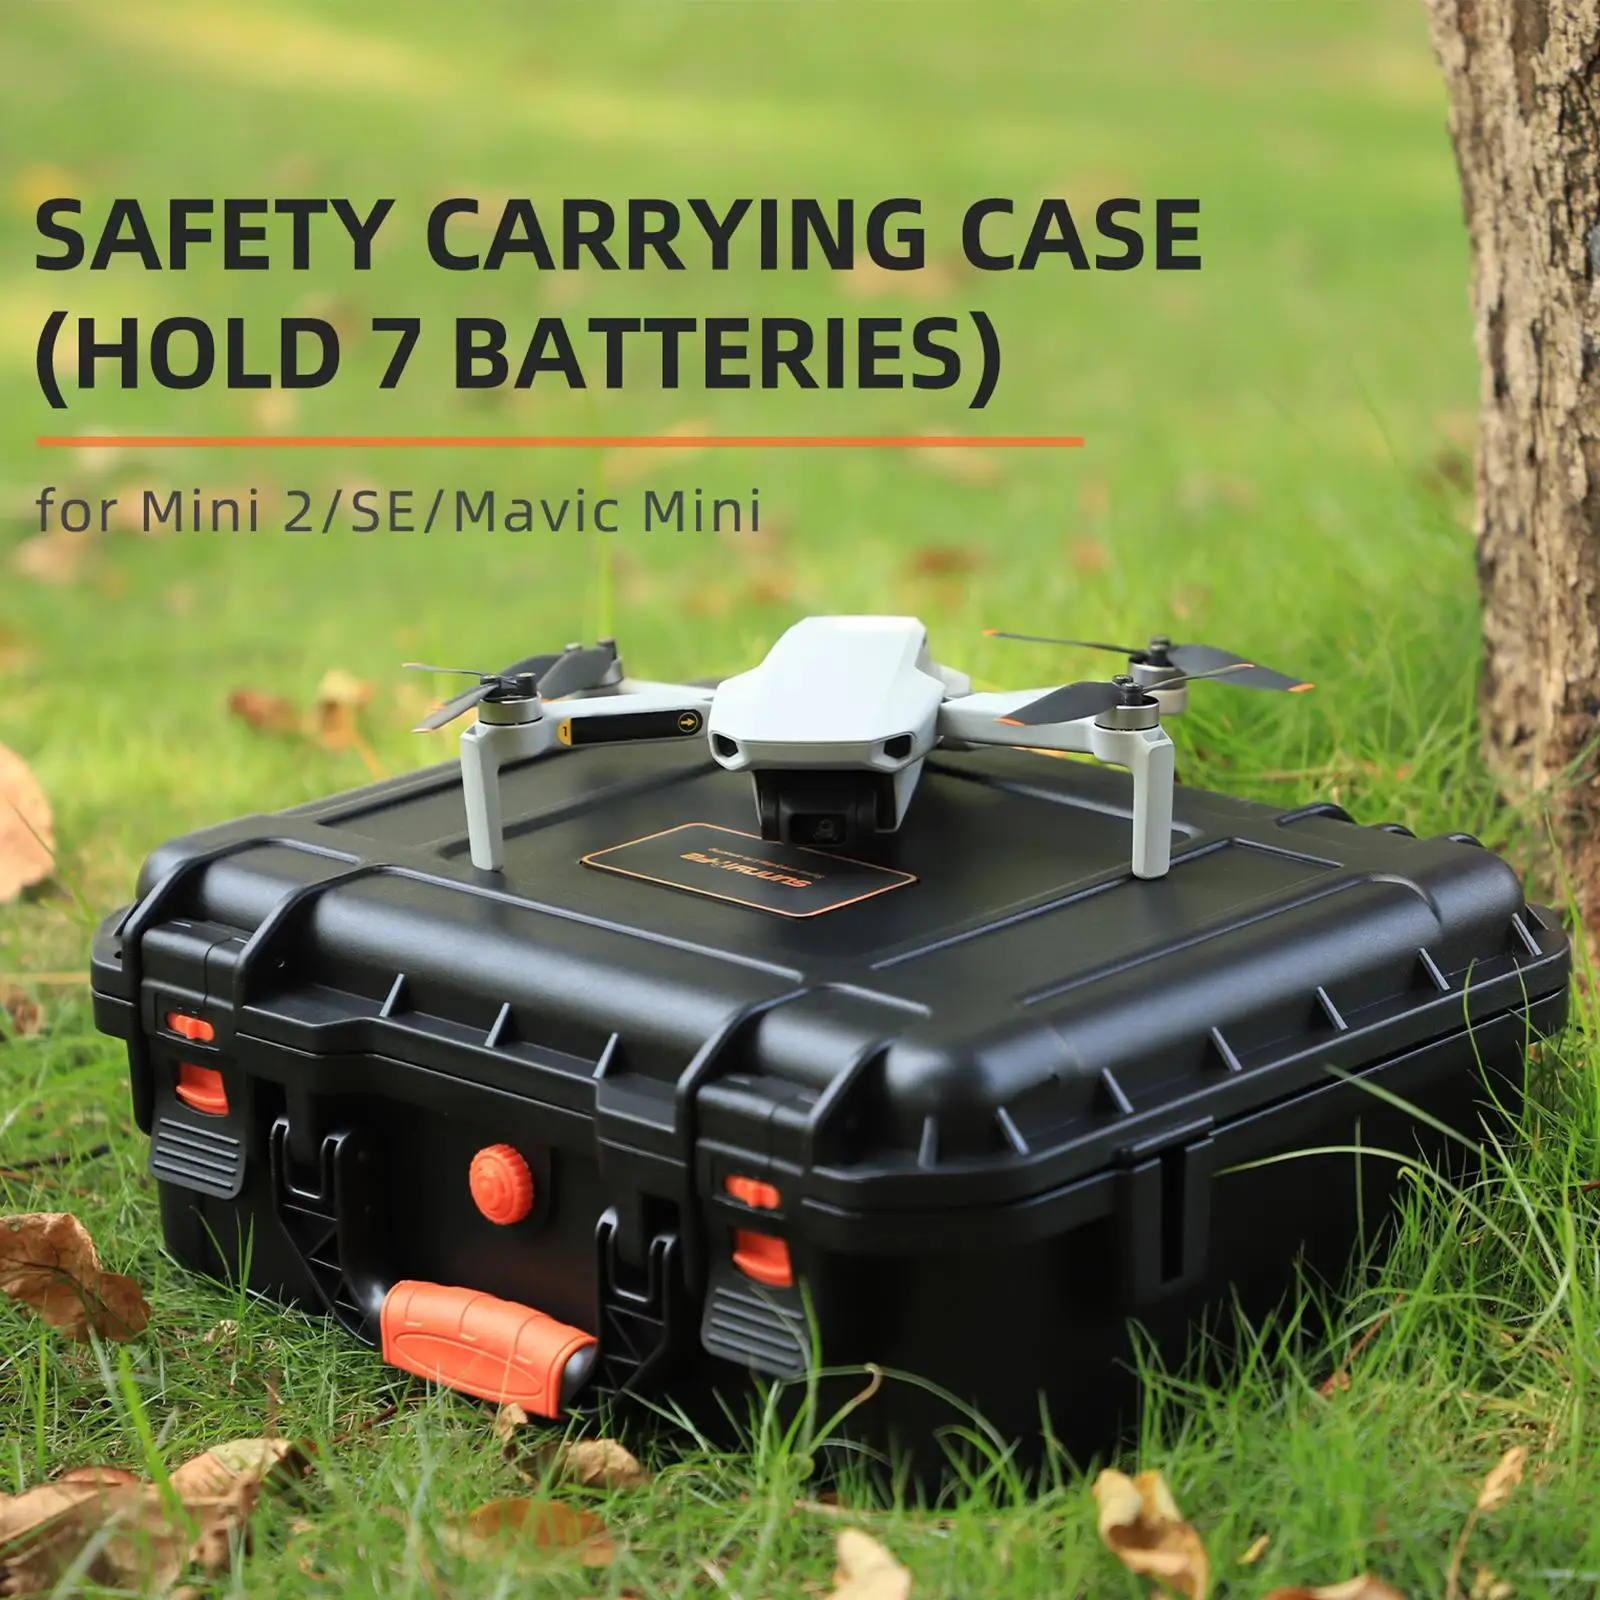 Drone Carrying Case Storage Case Travel Case Drone Carrying Handbag for Accessories